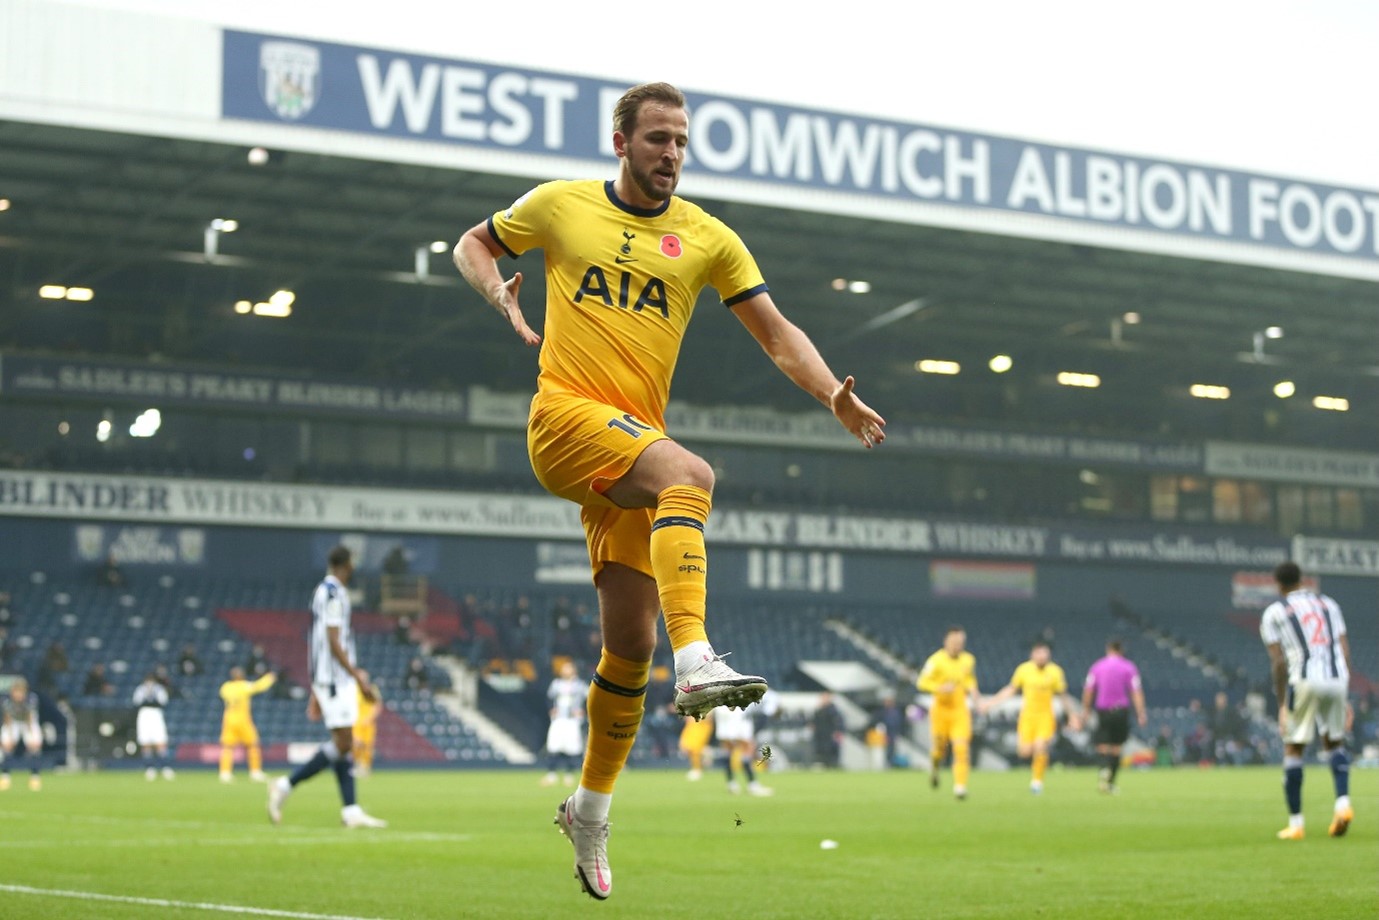 Harry Kane in a match against West Bromwich Albion.